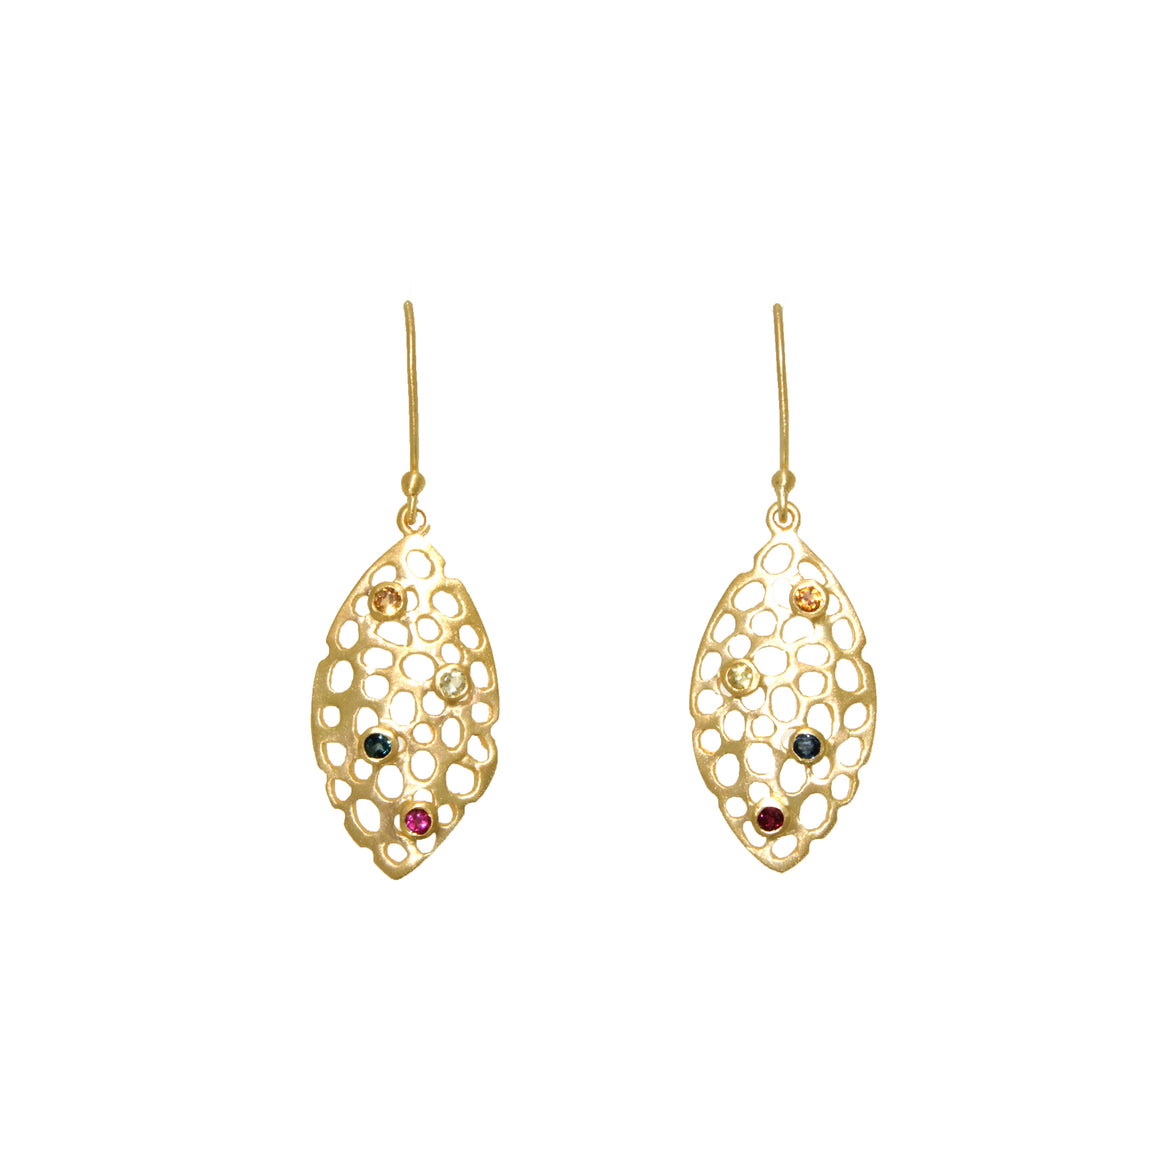 Tourmaline stones dotted into a mesh Gold Earring. This unique earring takes the wearer from casual to dressy and is a contemporary expression of femininity. Set in 22 carat Vermeil over Sterling Silver.